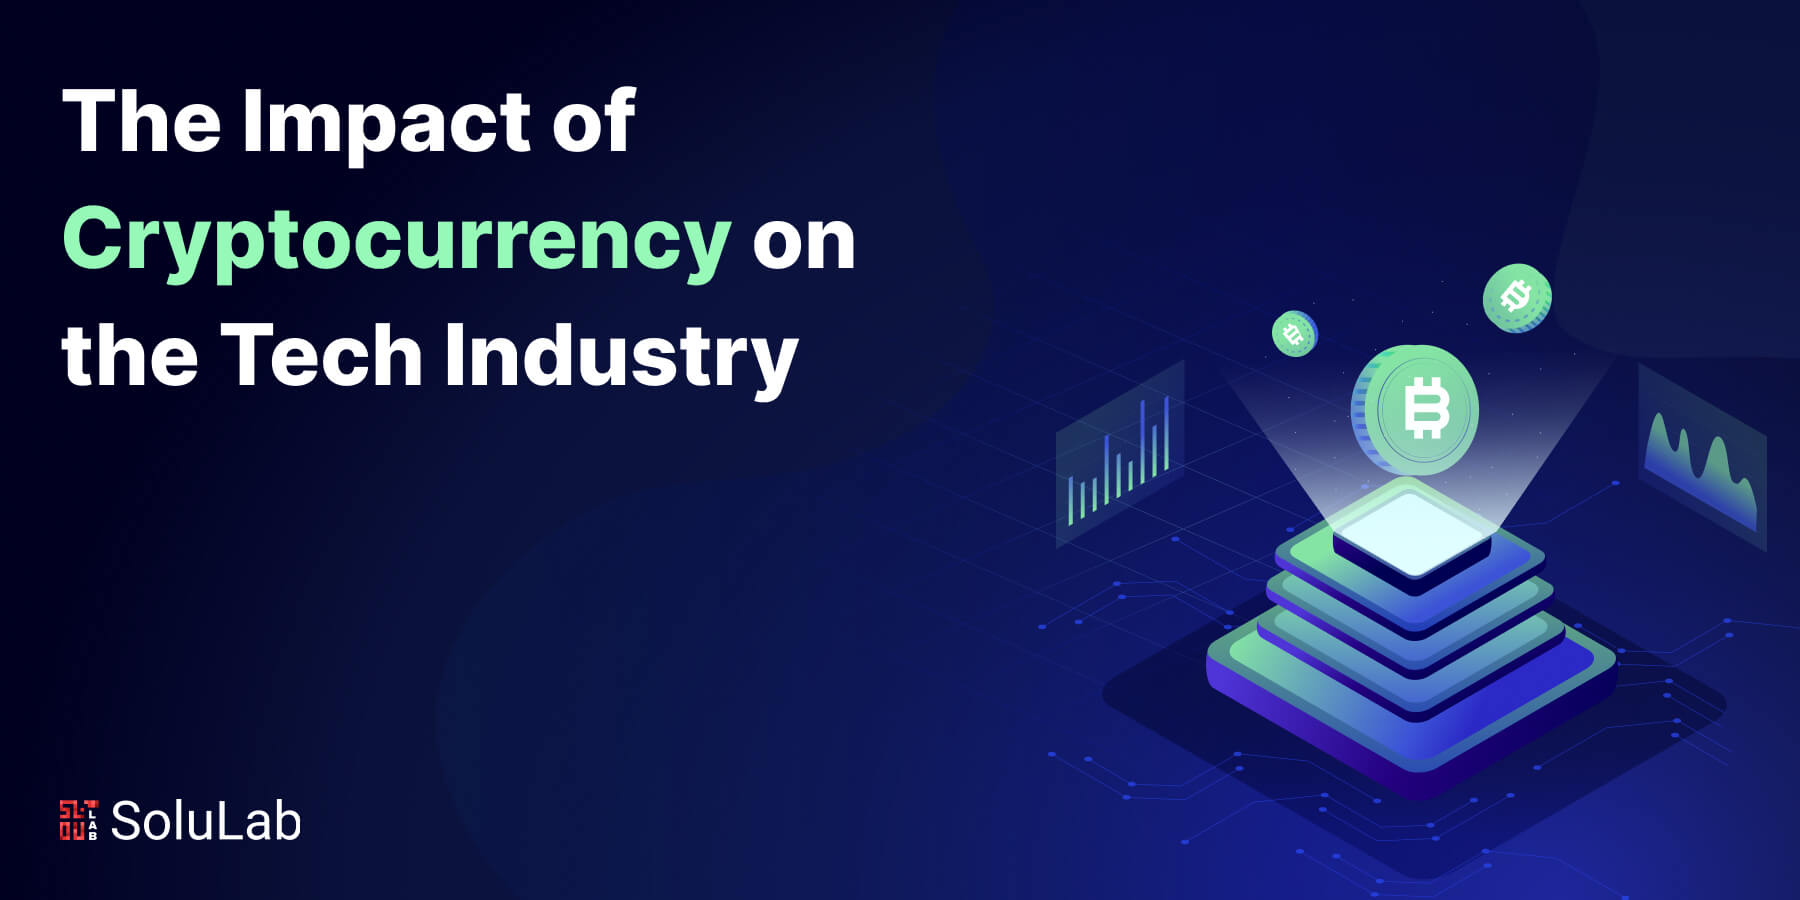 The Impact of Cryptocurrency on the Tech Industry